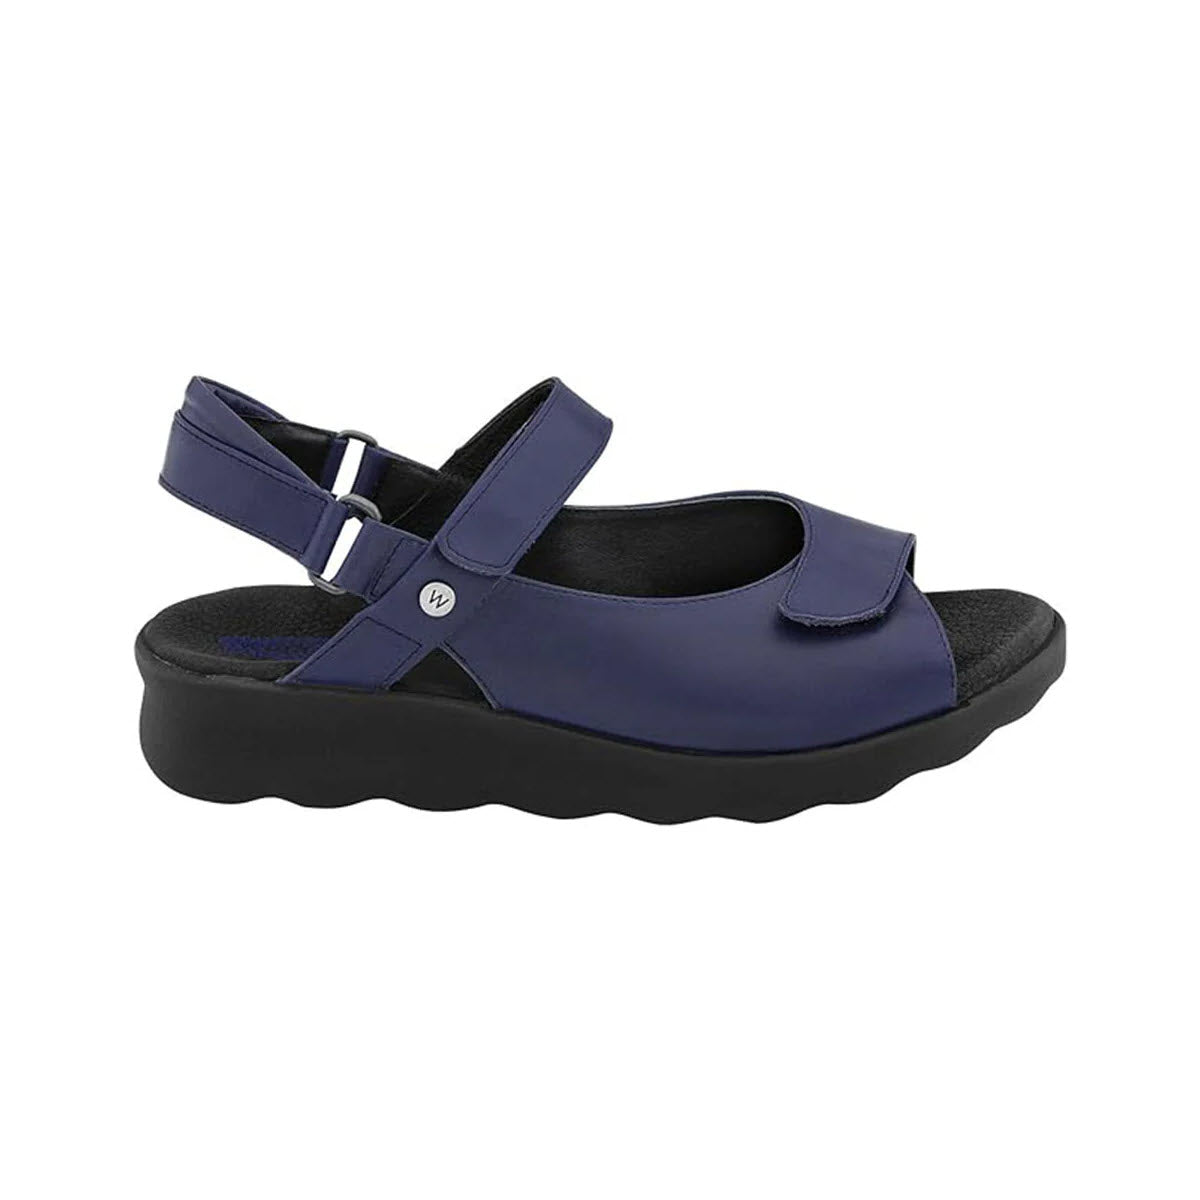 A single WOLKY PICHU PURPLE sandal with an adjustable strap and a chunky black sole featuring awe-inspiring grip, isolated on a white background.